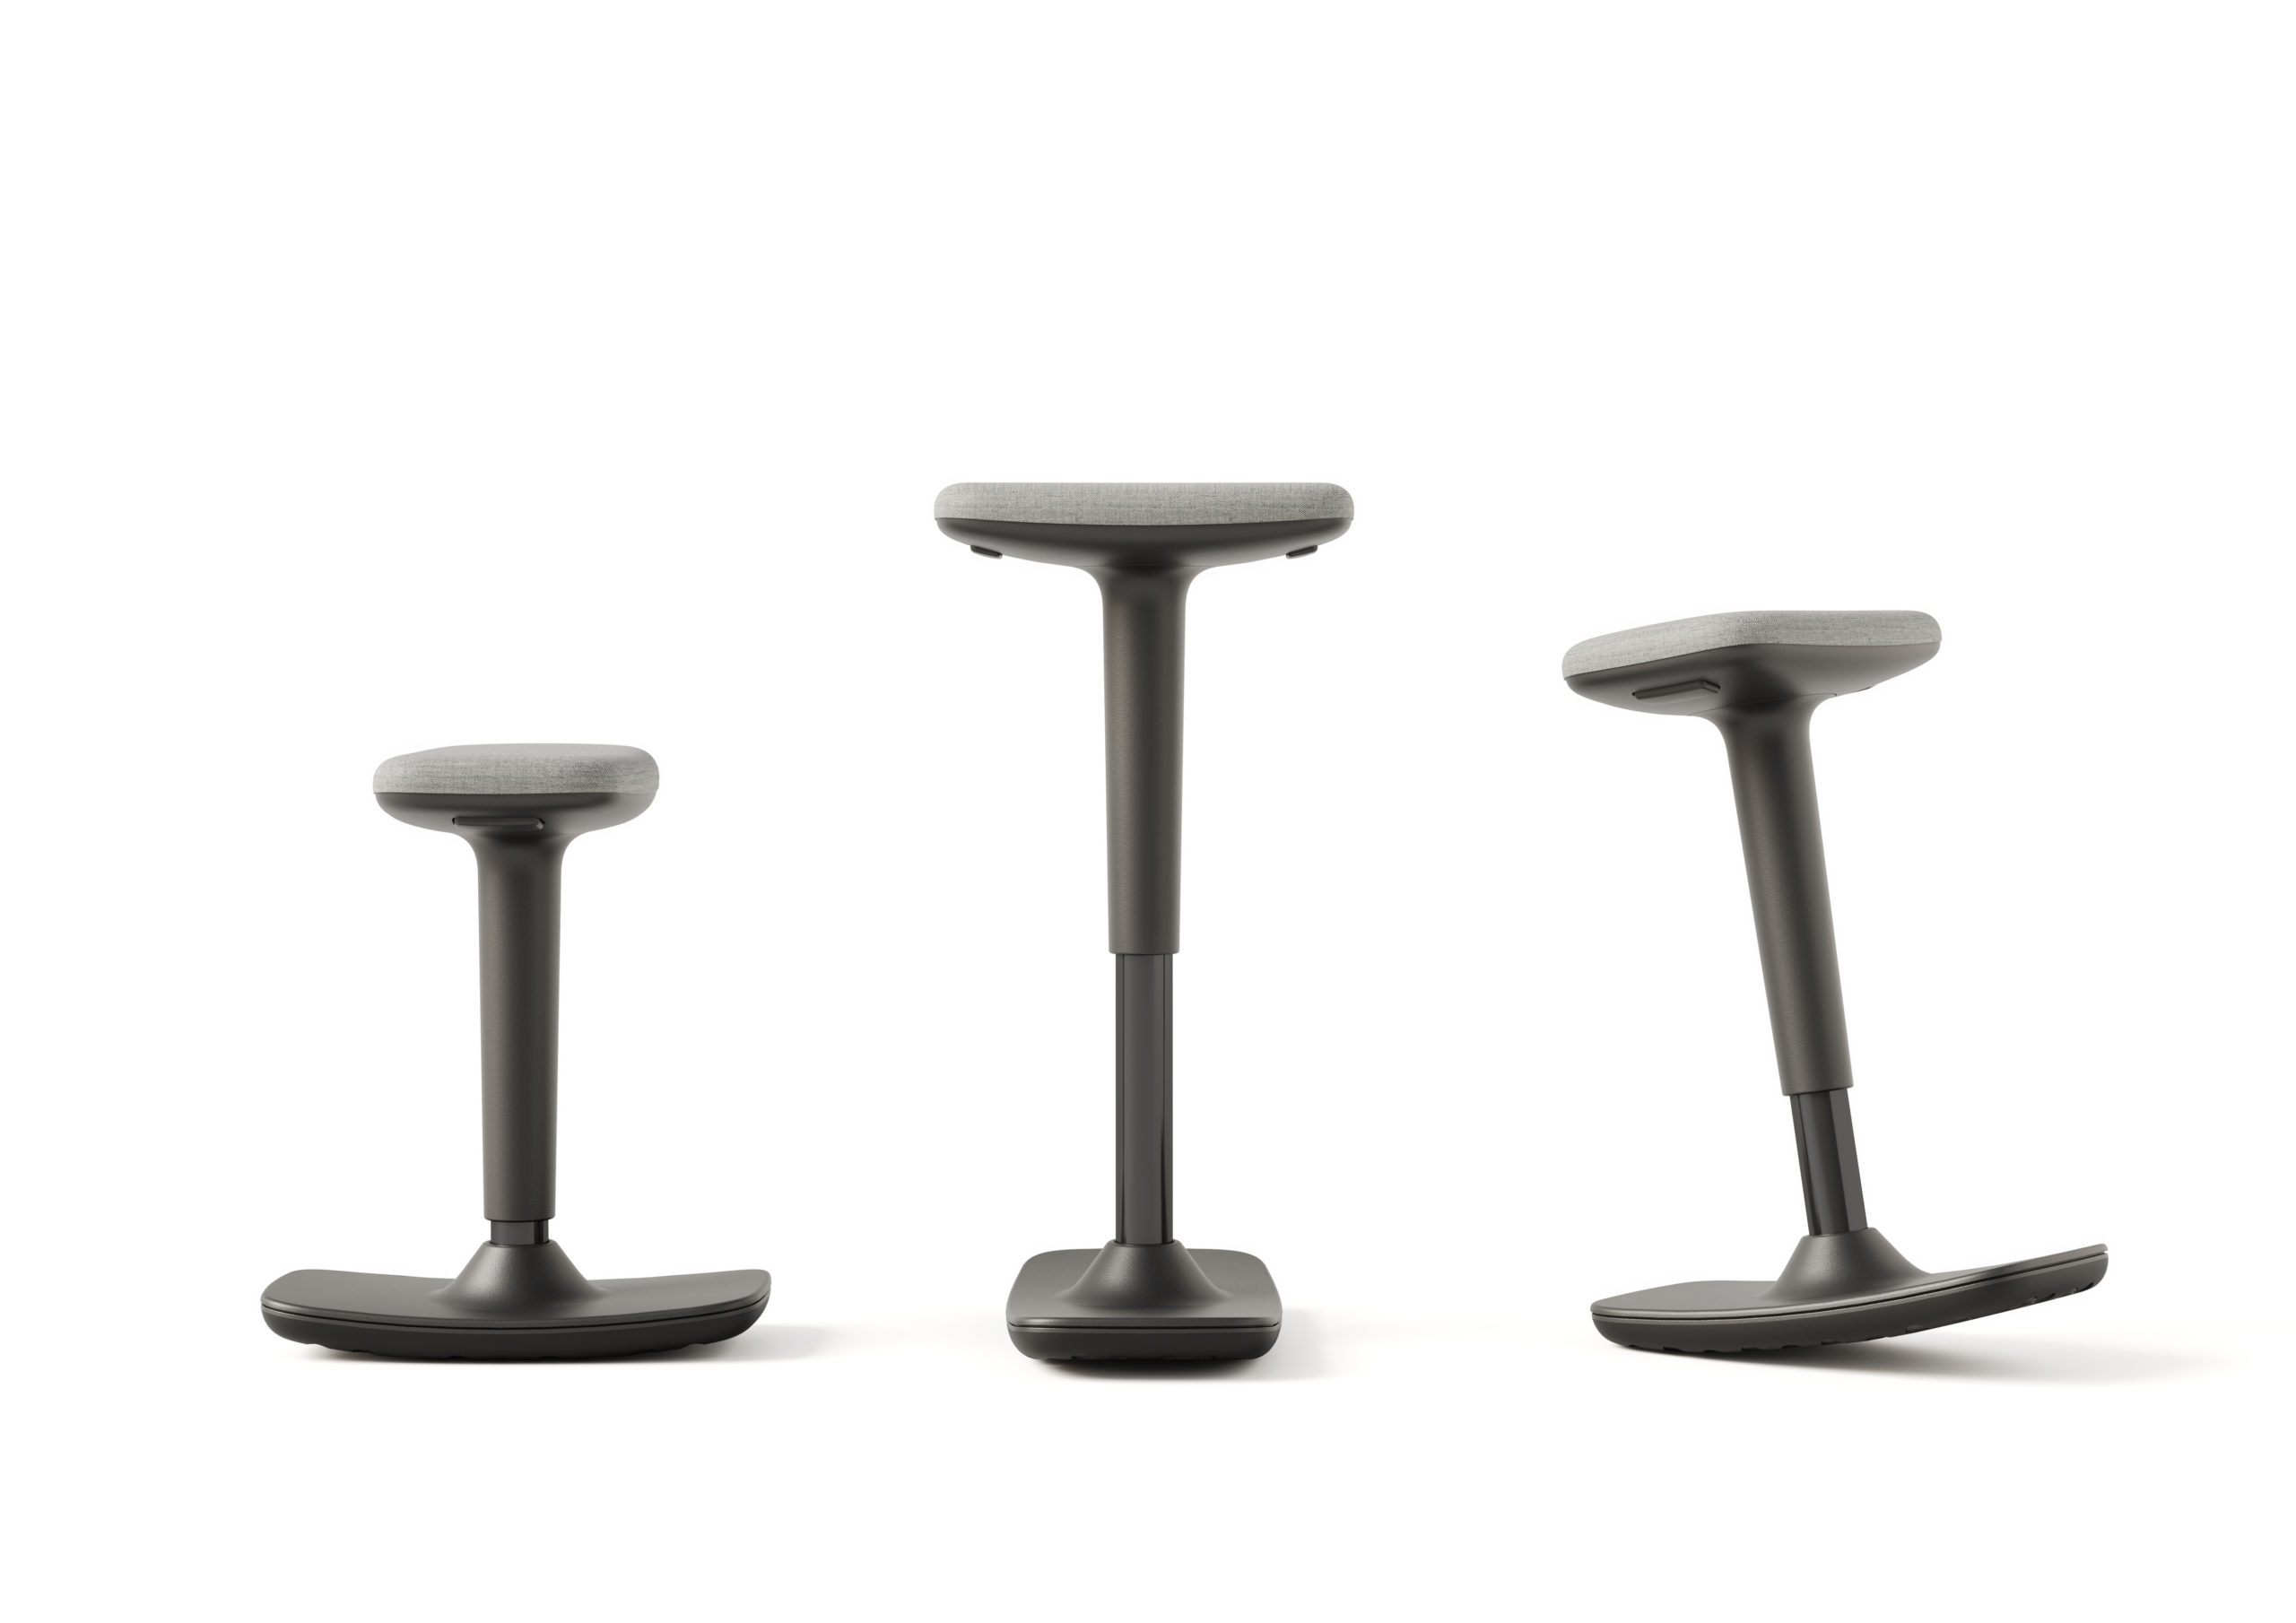 In a Rush stool showing tilt and height adjustment